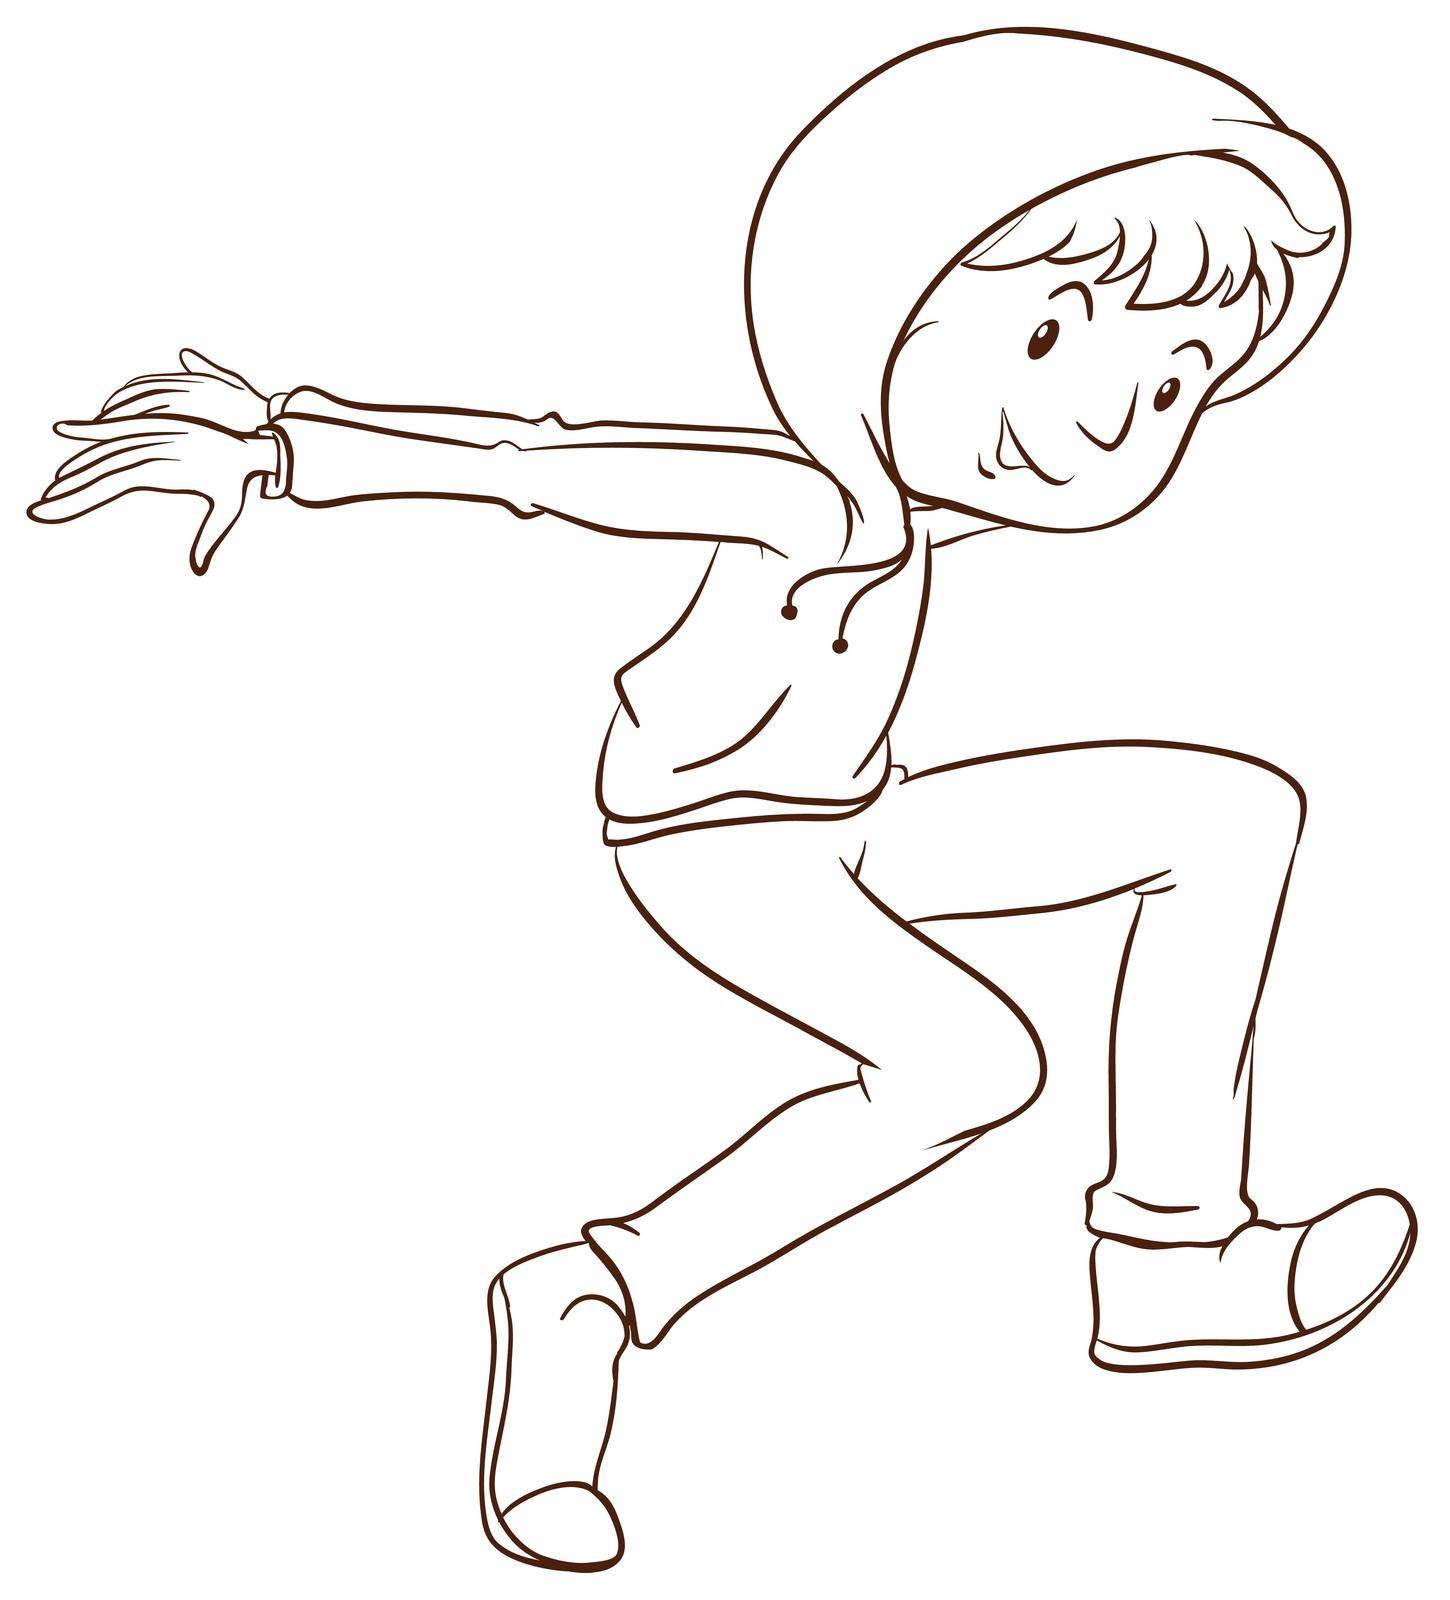 Illustration of a plain drawing of a dancer on a white background